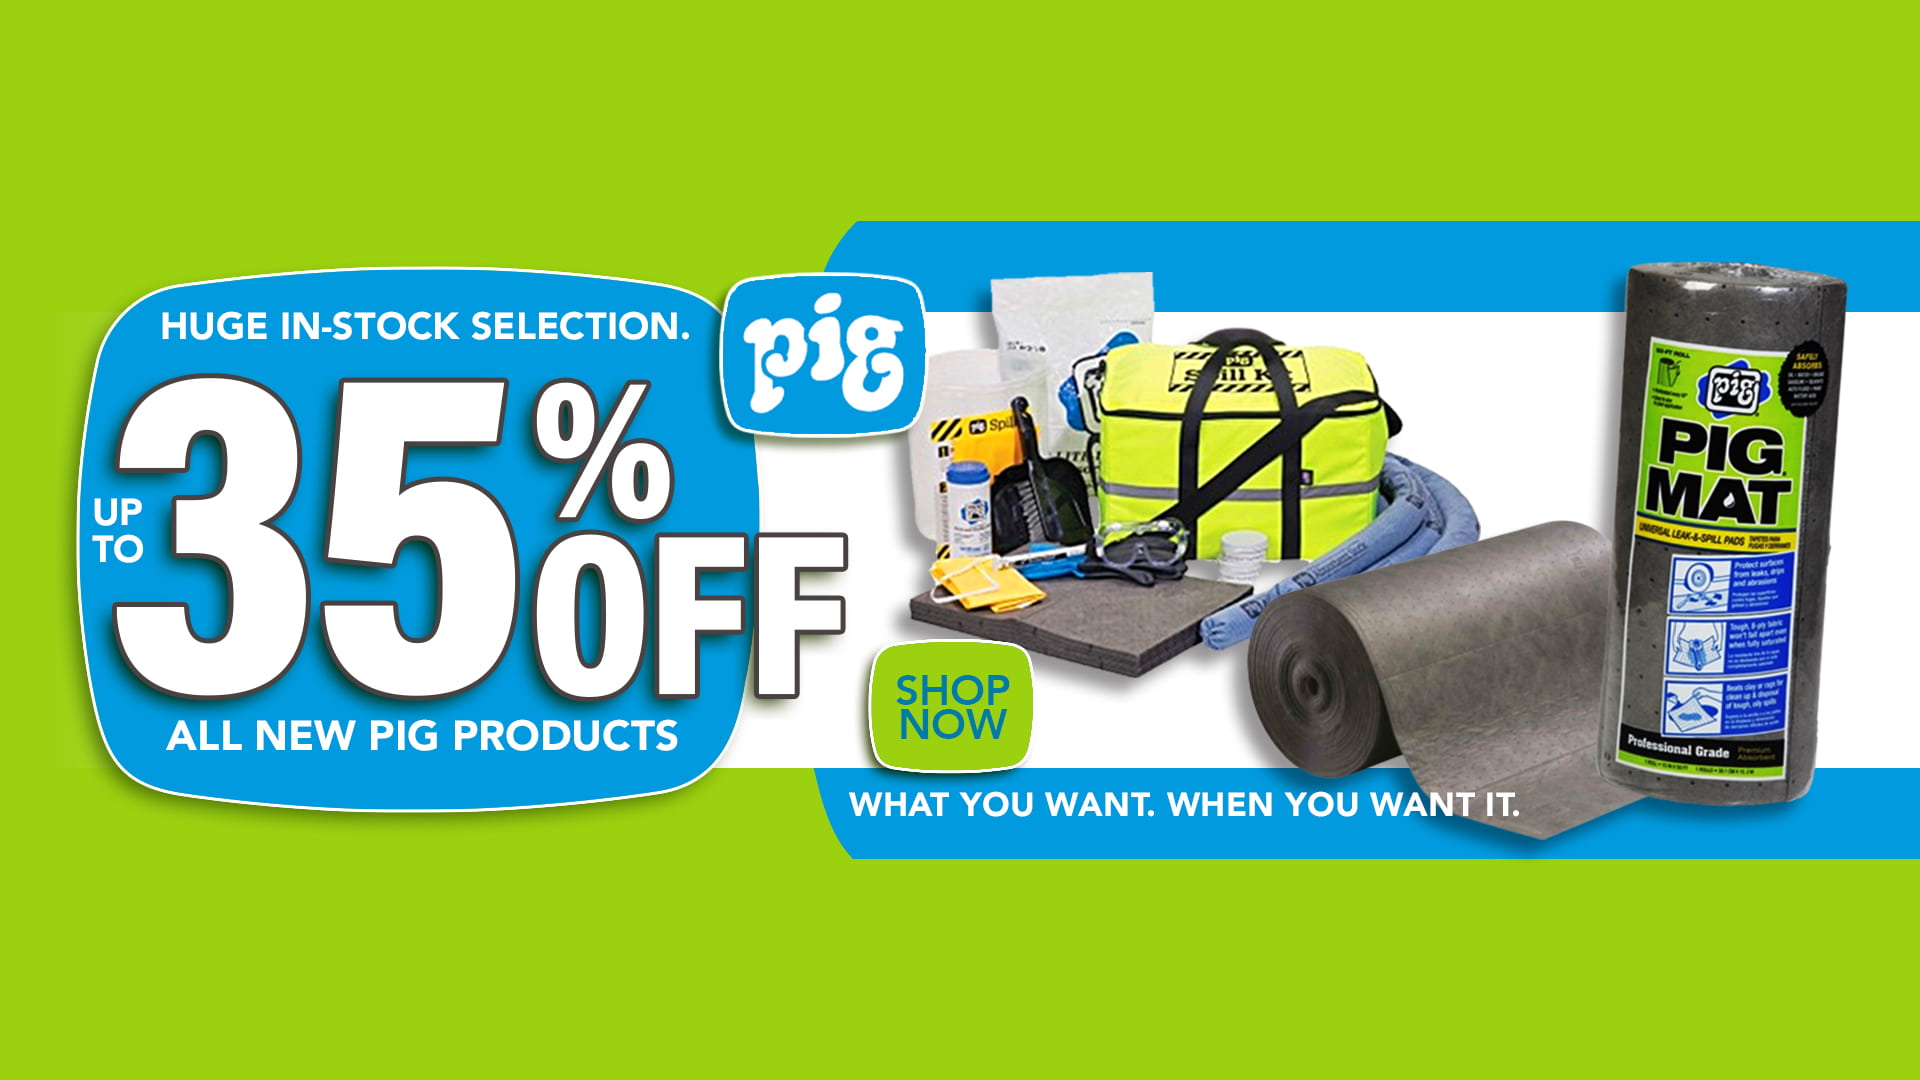 Save Up To 35% on All New Pig Products